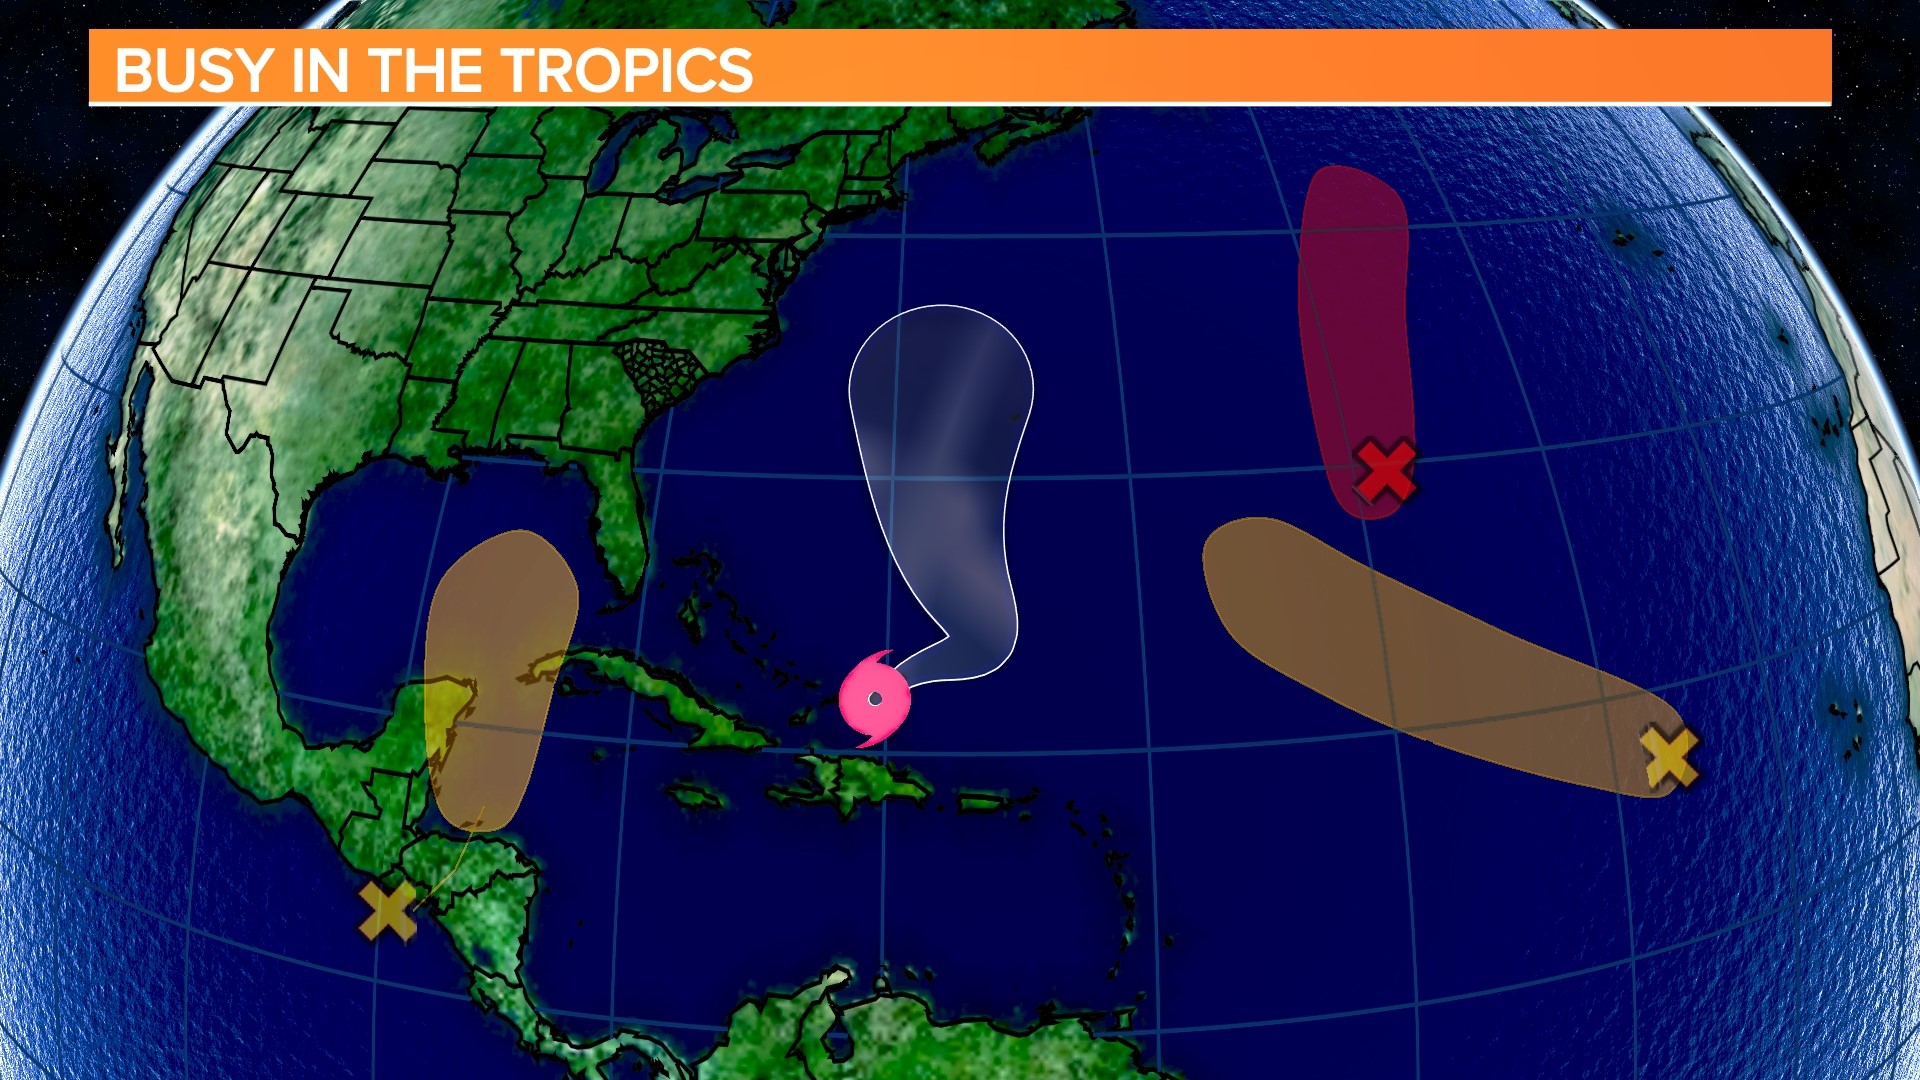 The activity in the tropics is heating up.